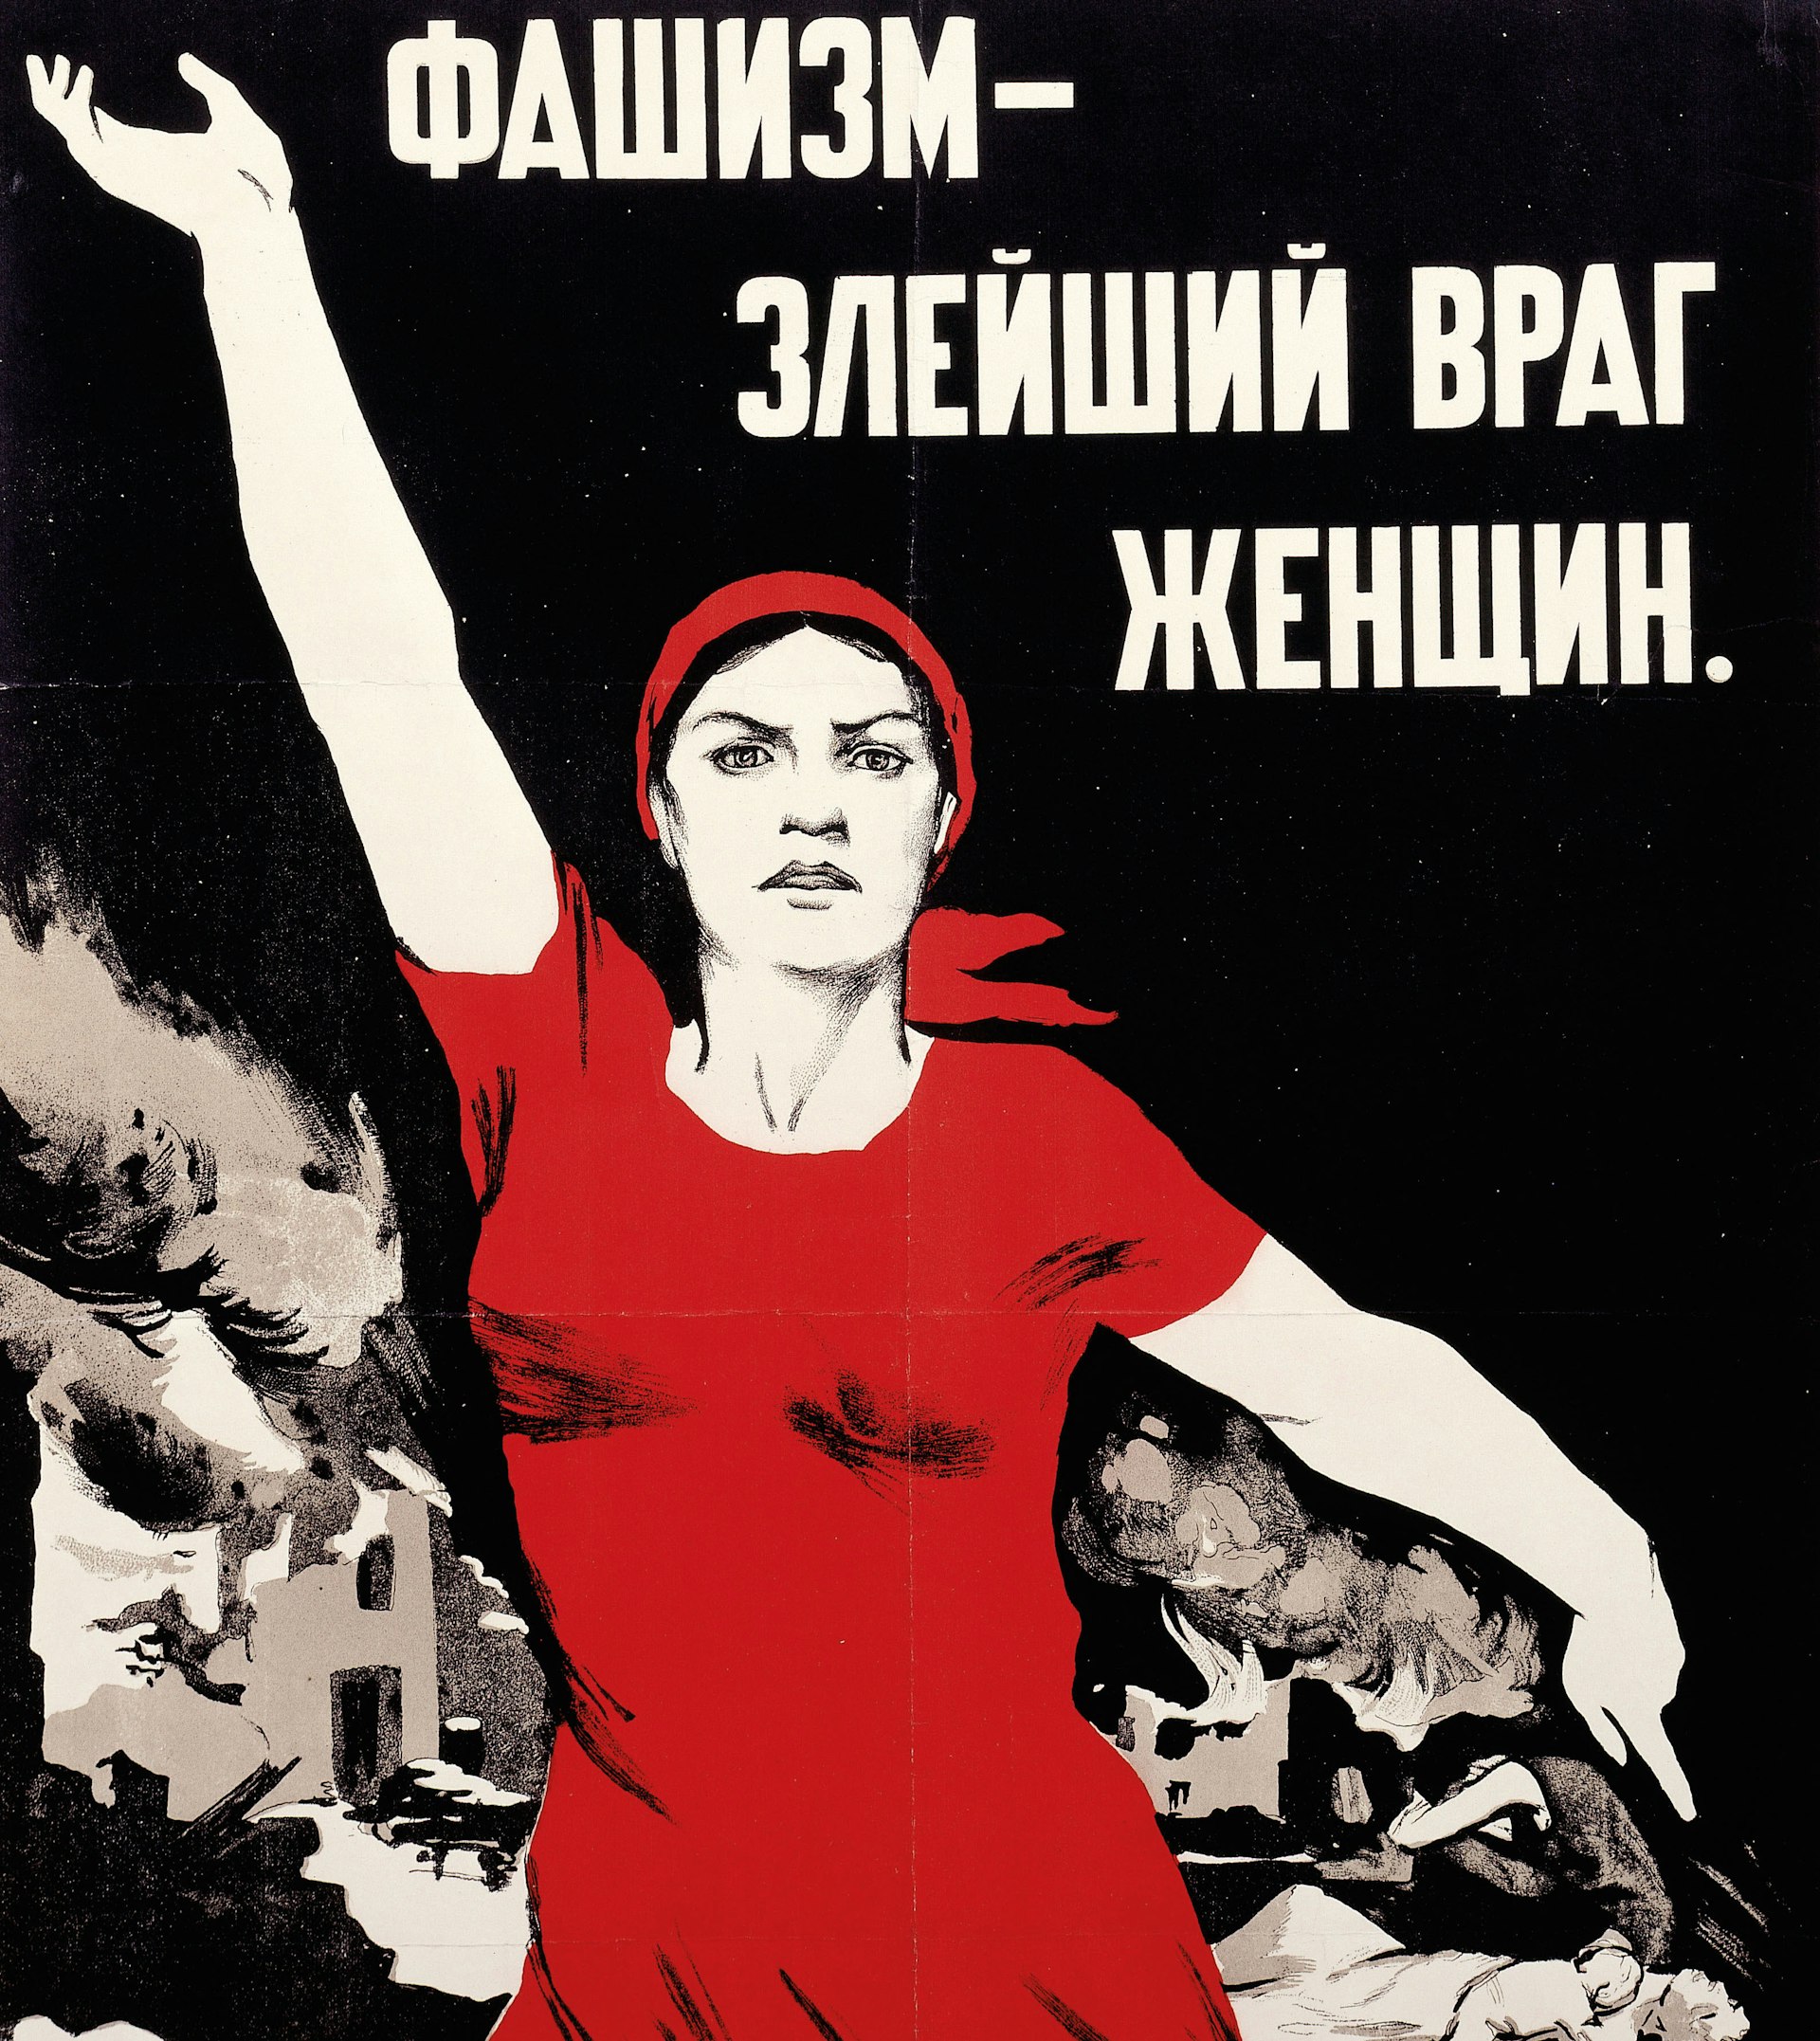 The art behind Russia’s revolutionary uprisings